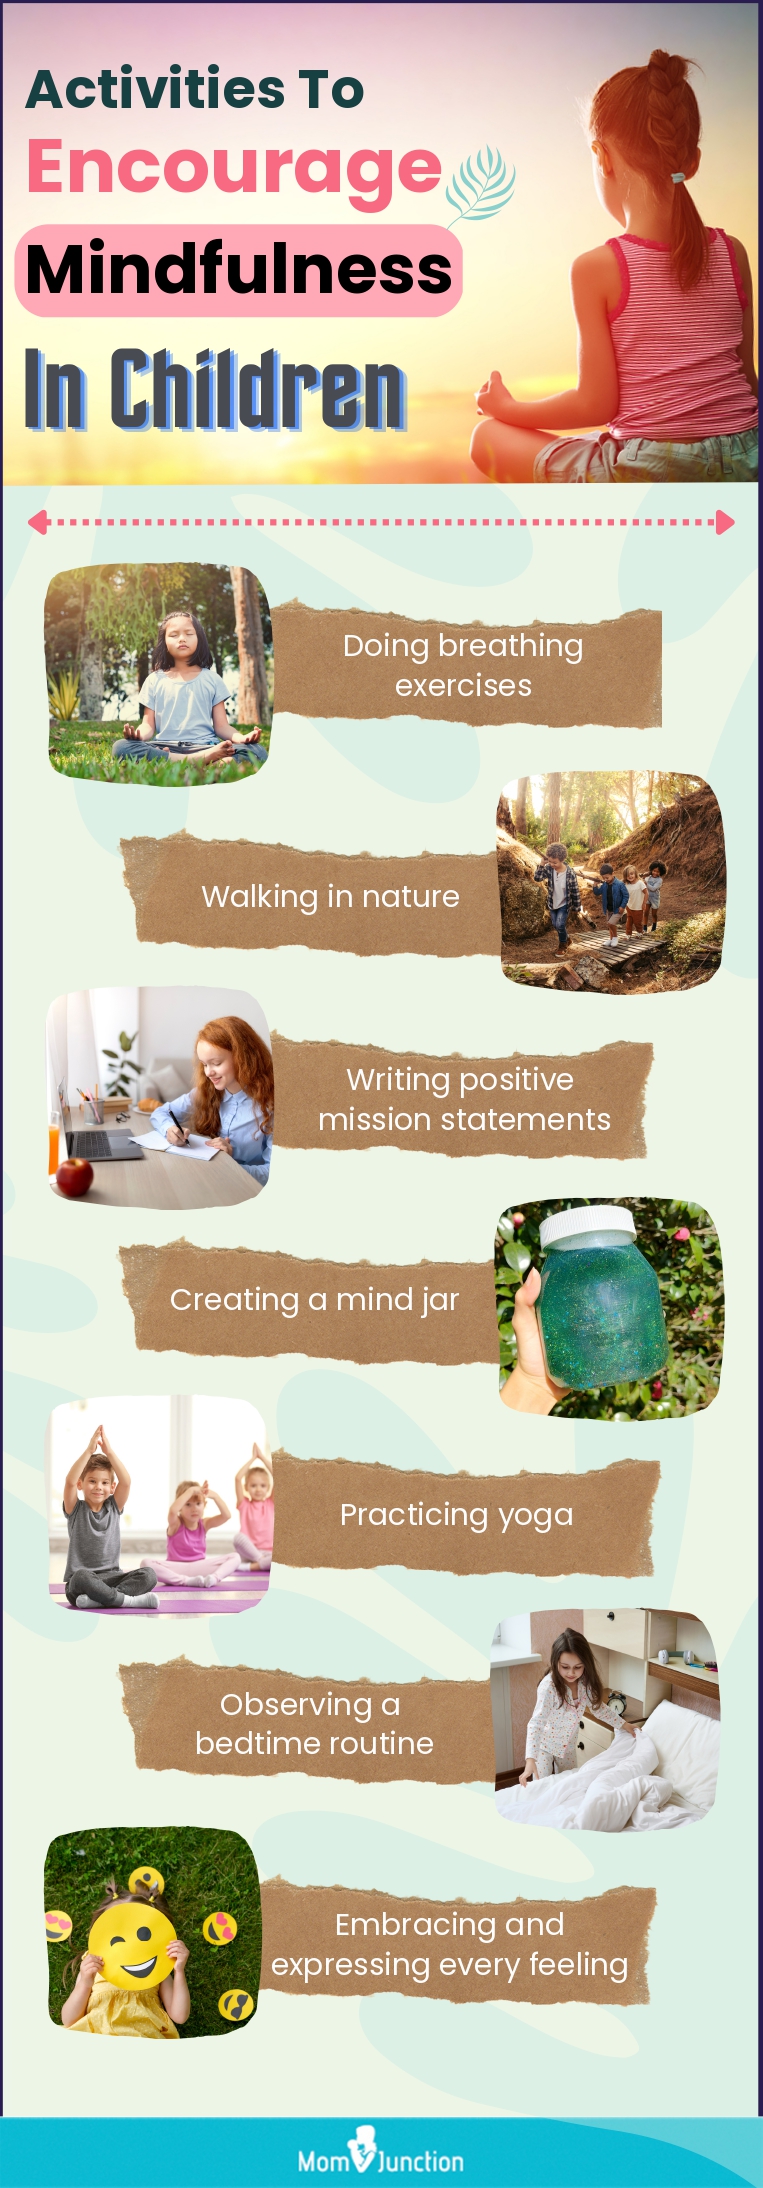 activities to encourage mindfulness in children (infographic)